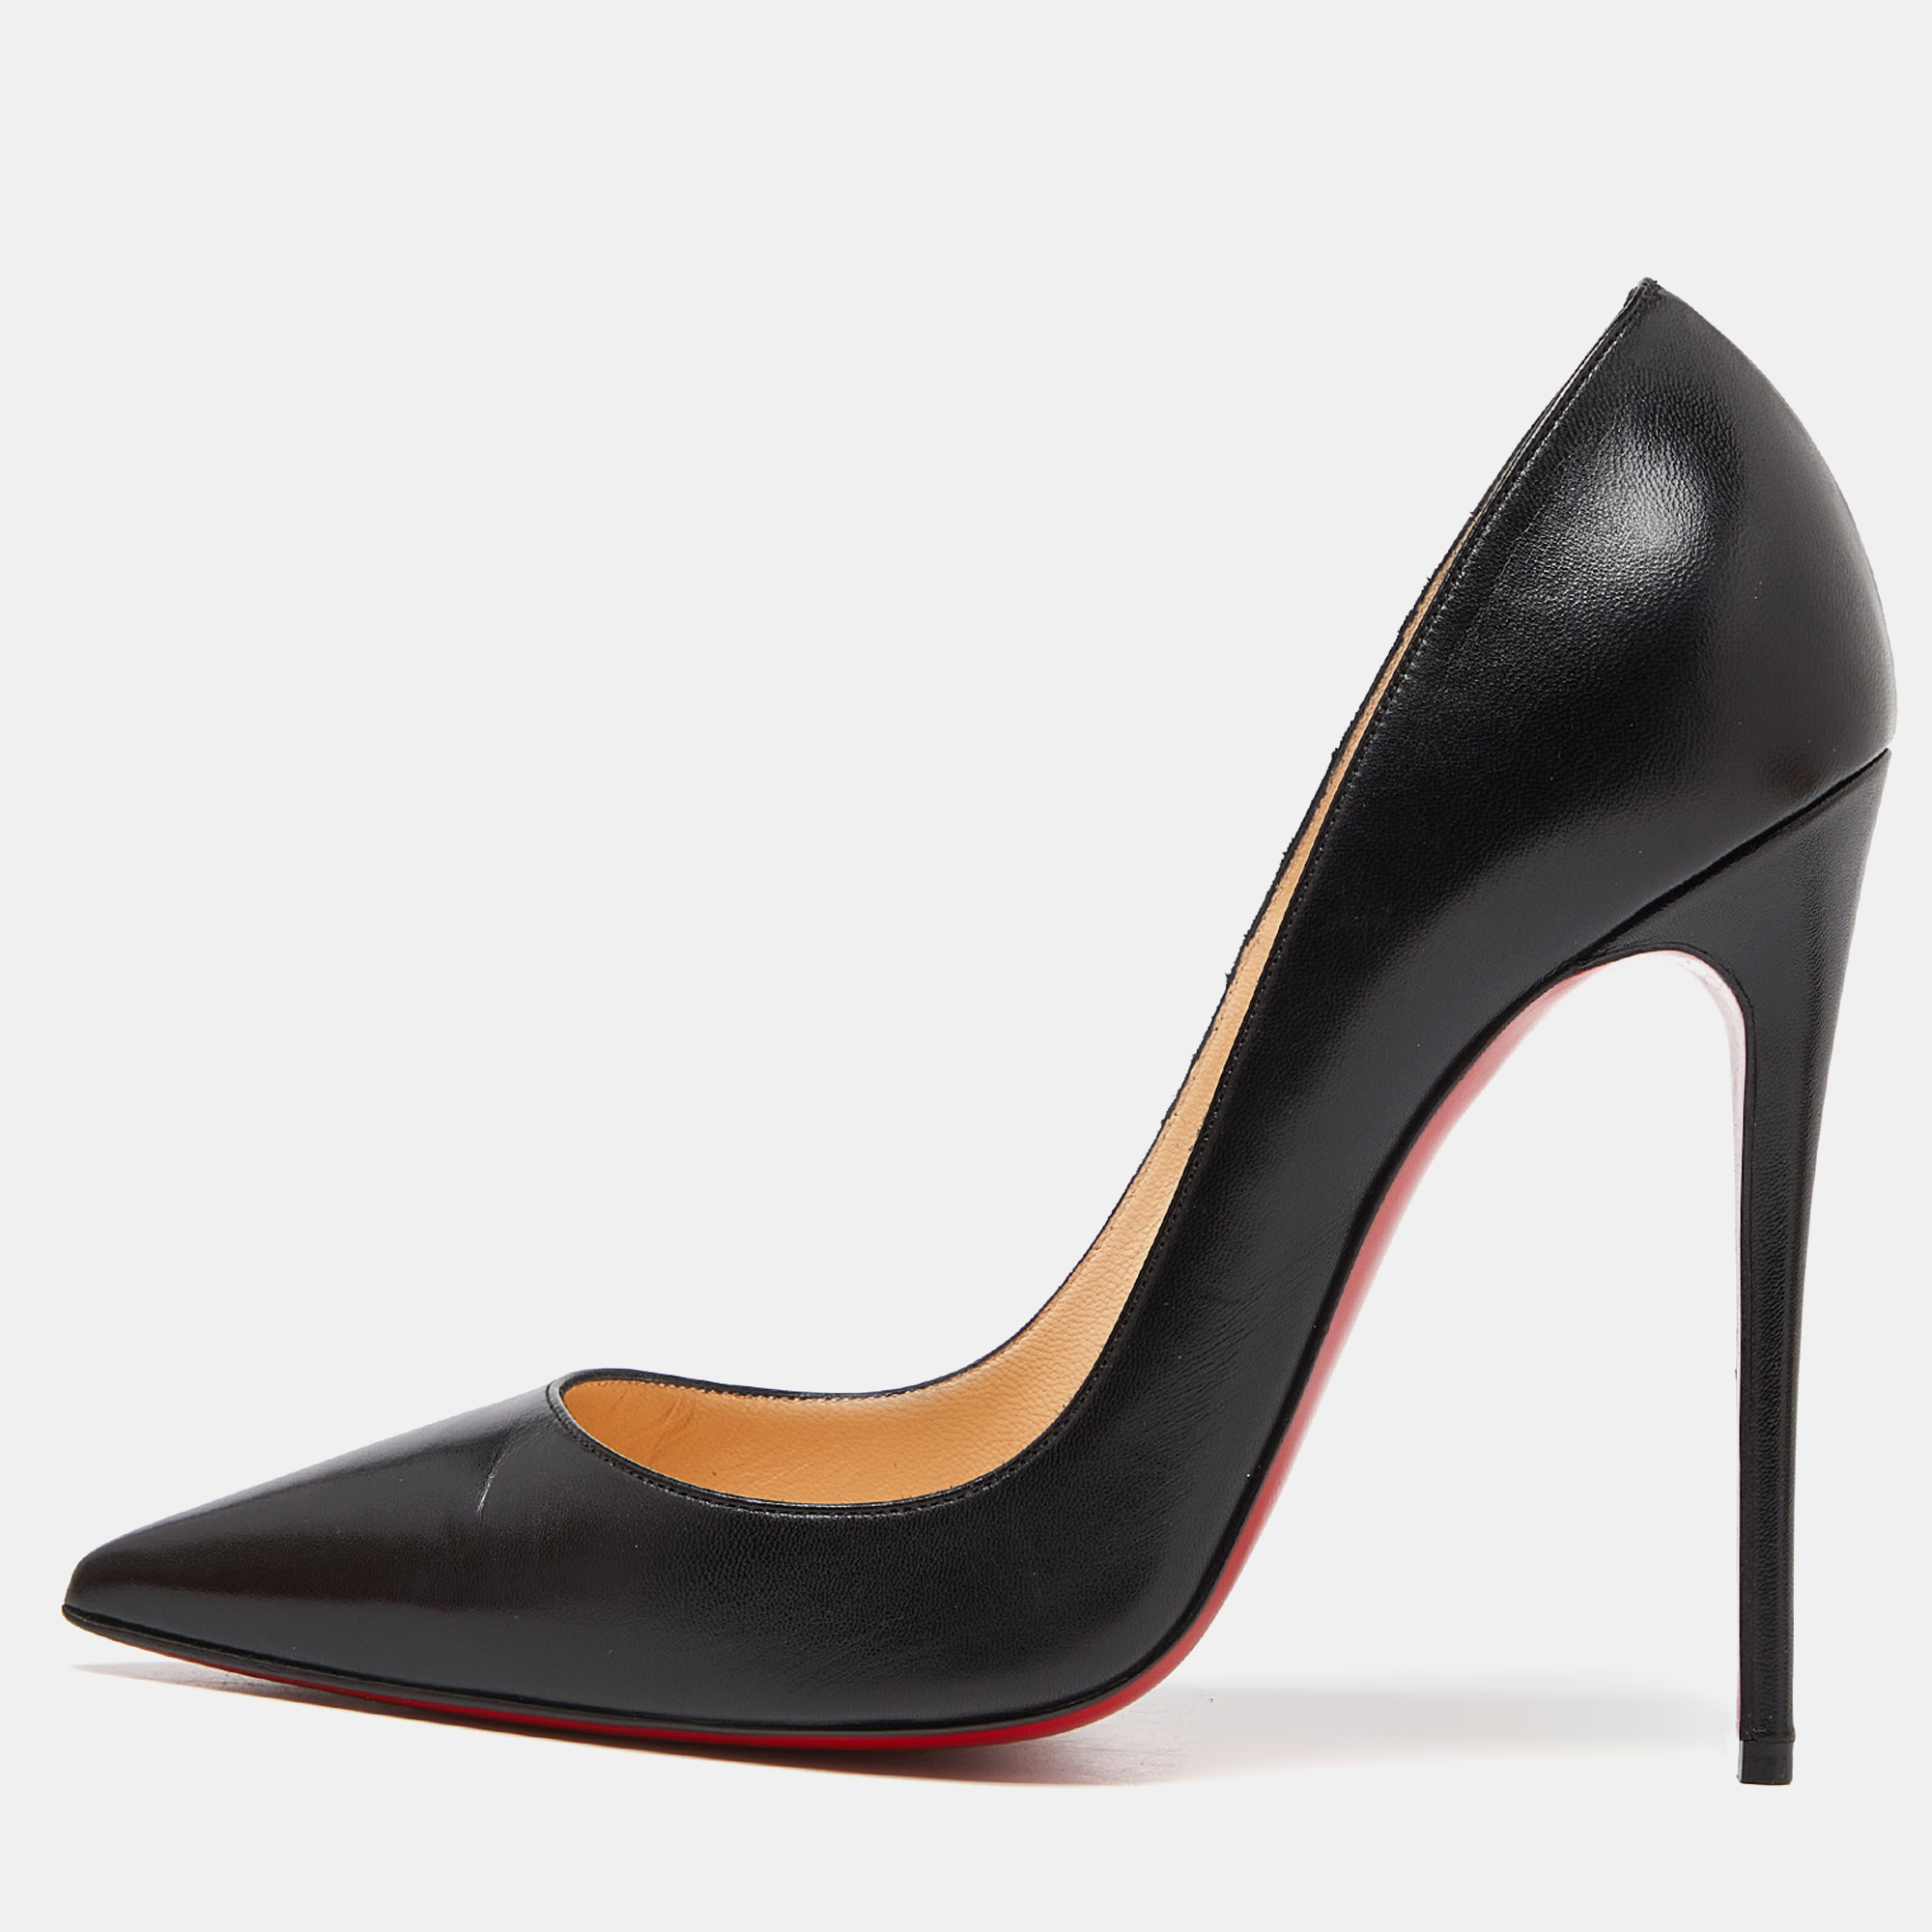 Pre-owned Christian Louboutin Black Leather Pigalle Pumps Size 38